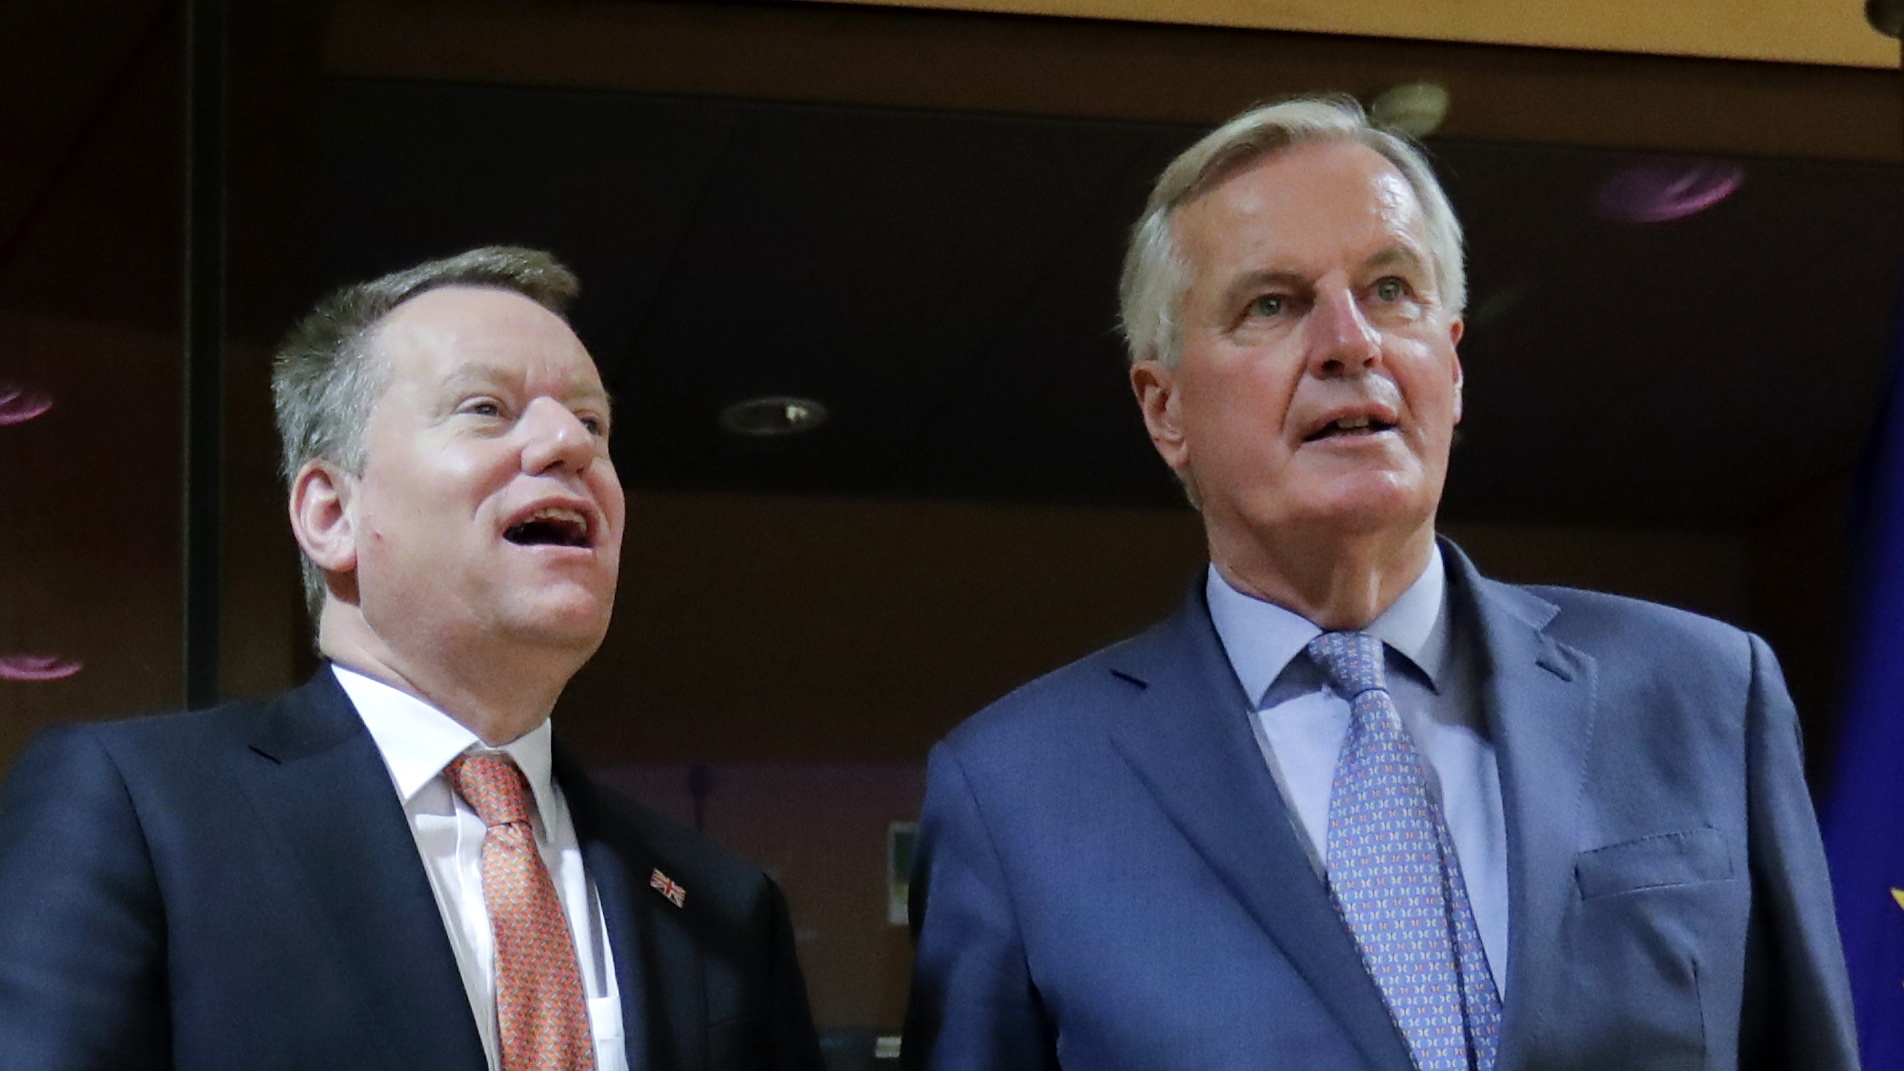 Michel Barnier and Lord David Frost pose for a photograph